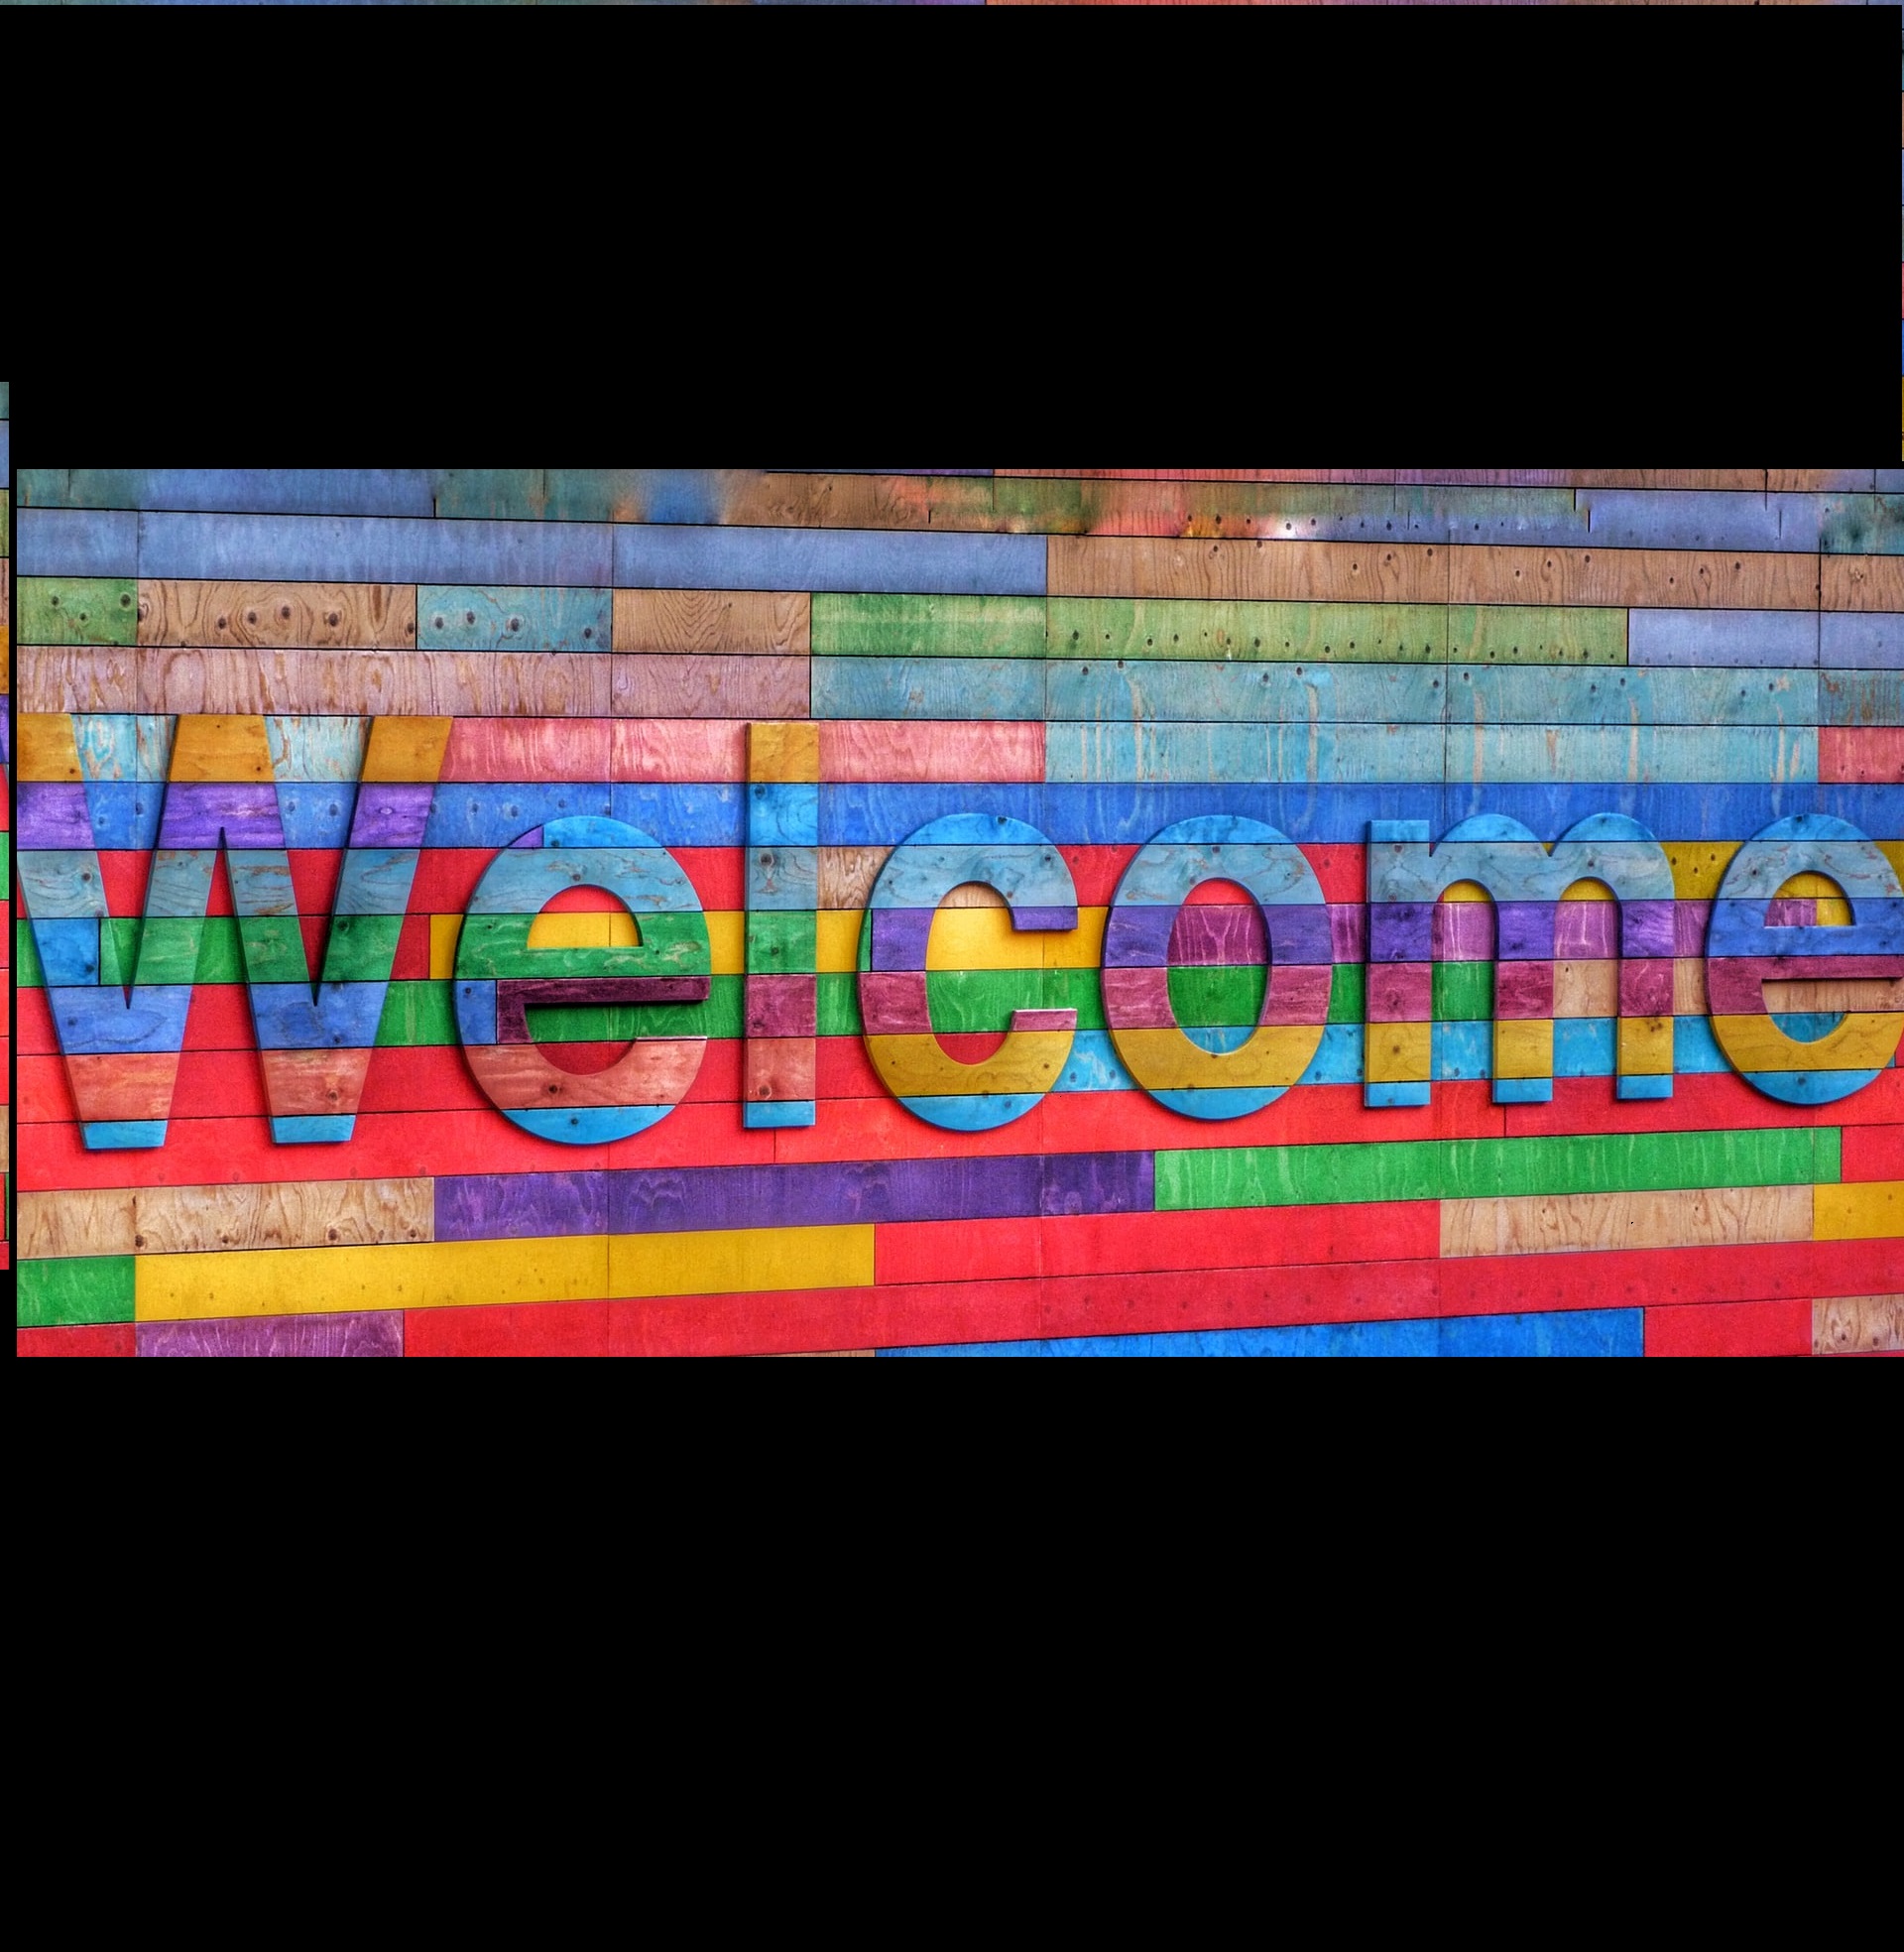 A colorful welcome sign.